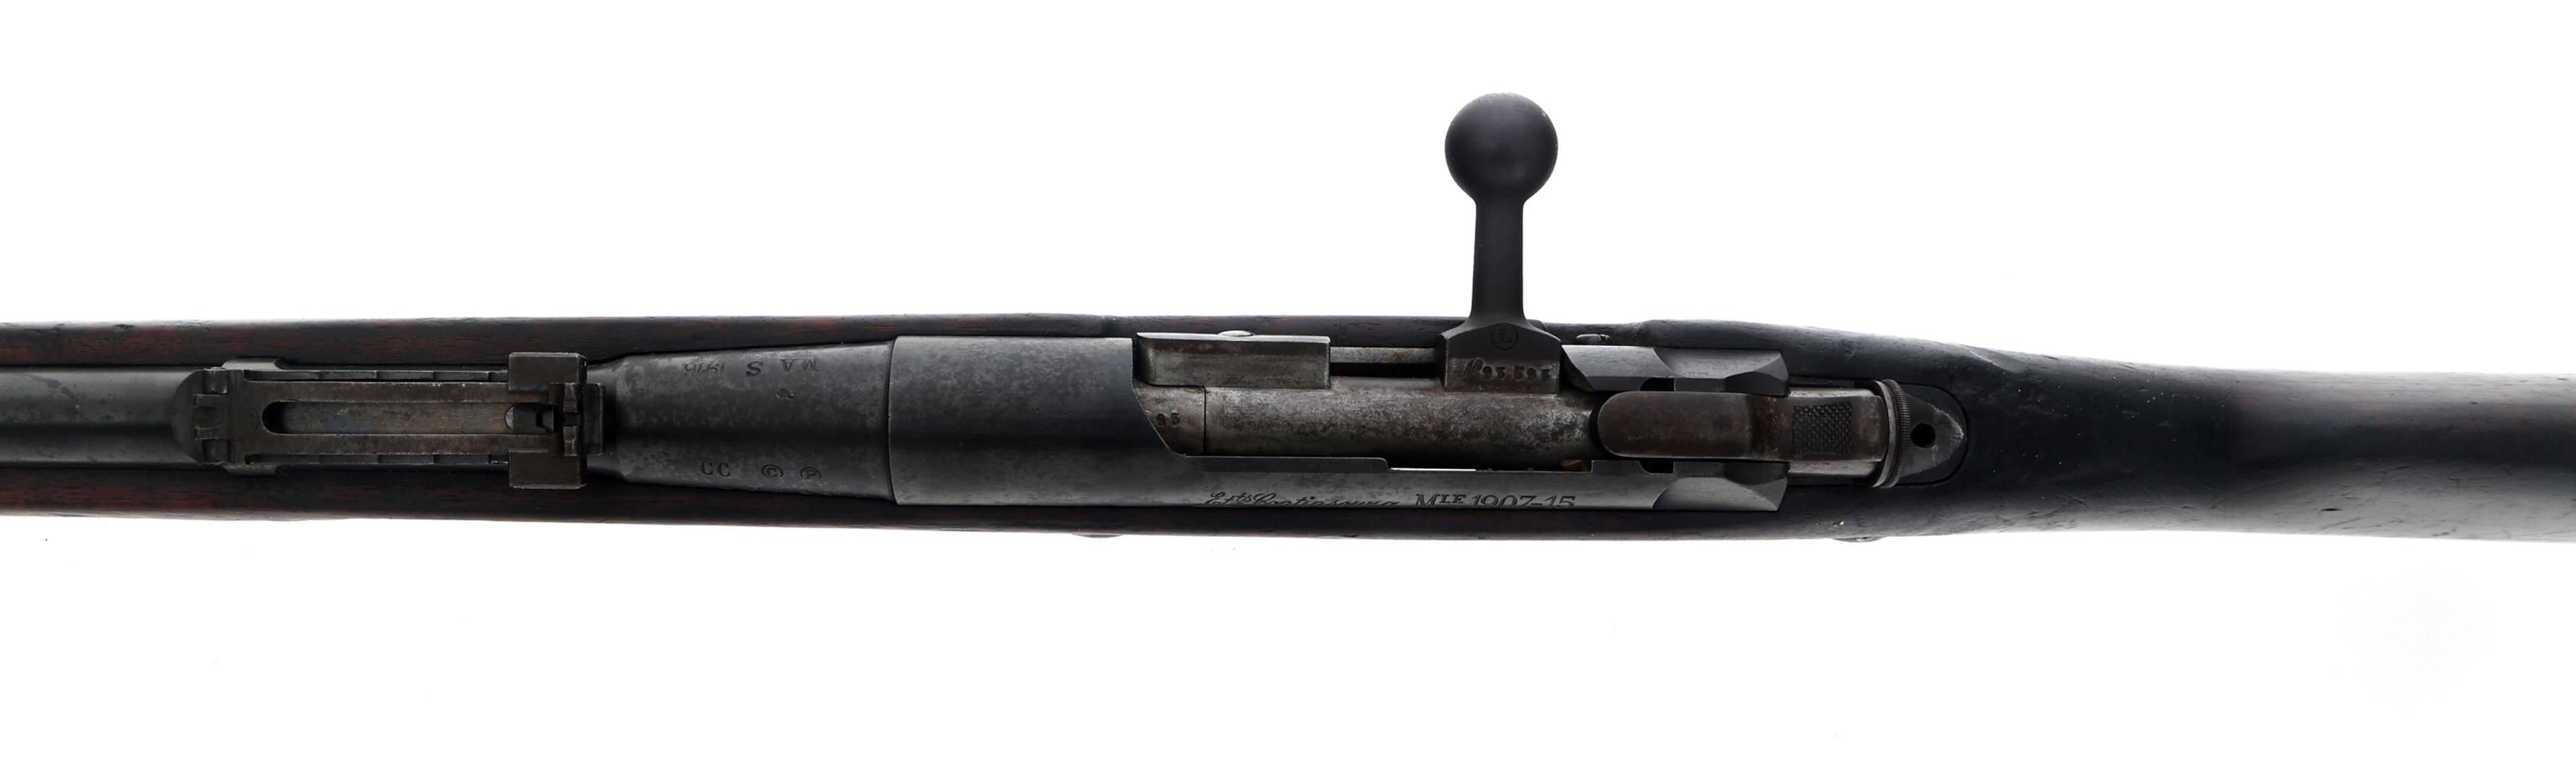 FRENCH CONTINSOUZA MODEL 1907/15 7.5mm RIFLE